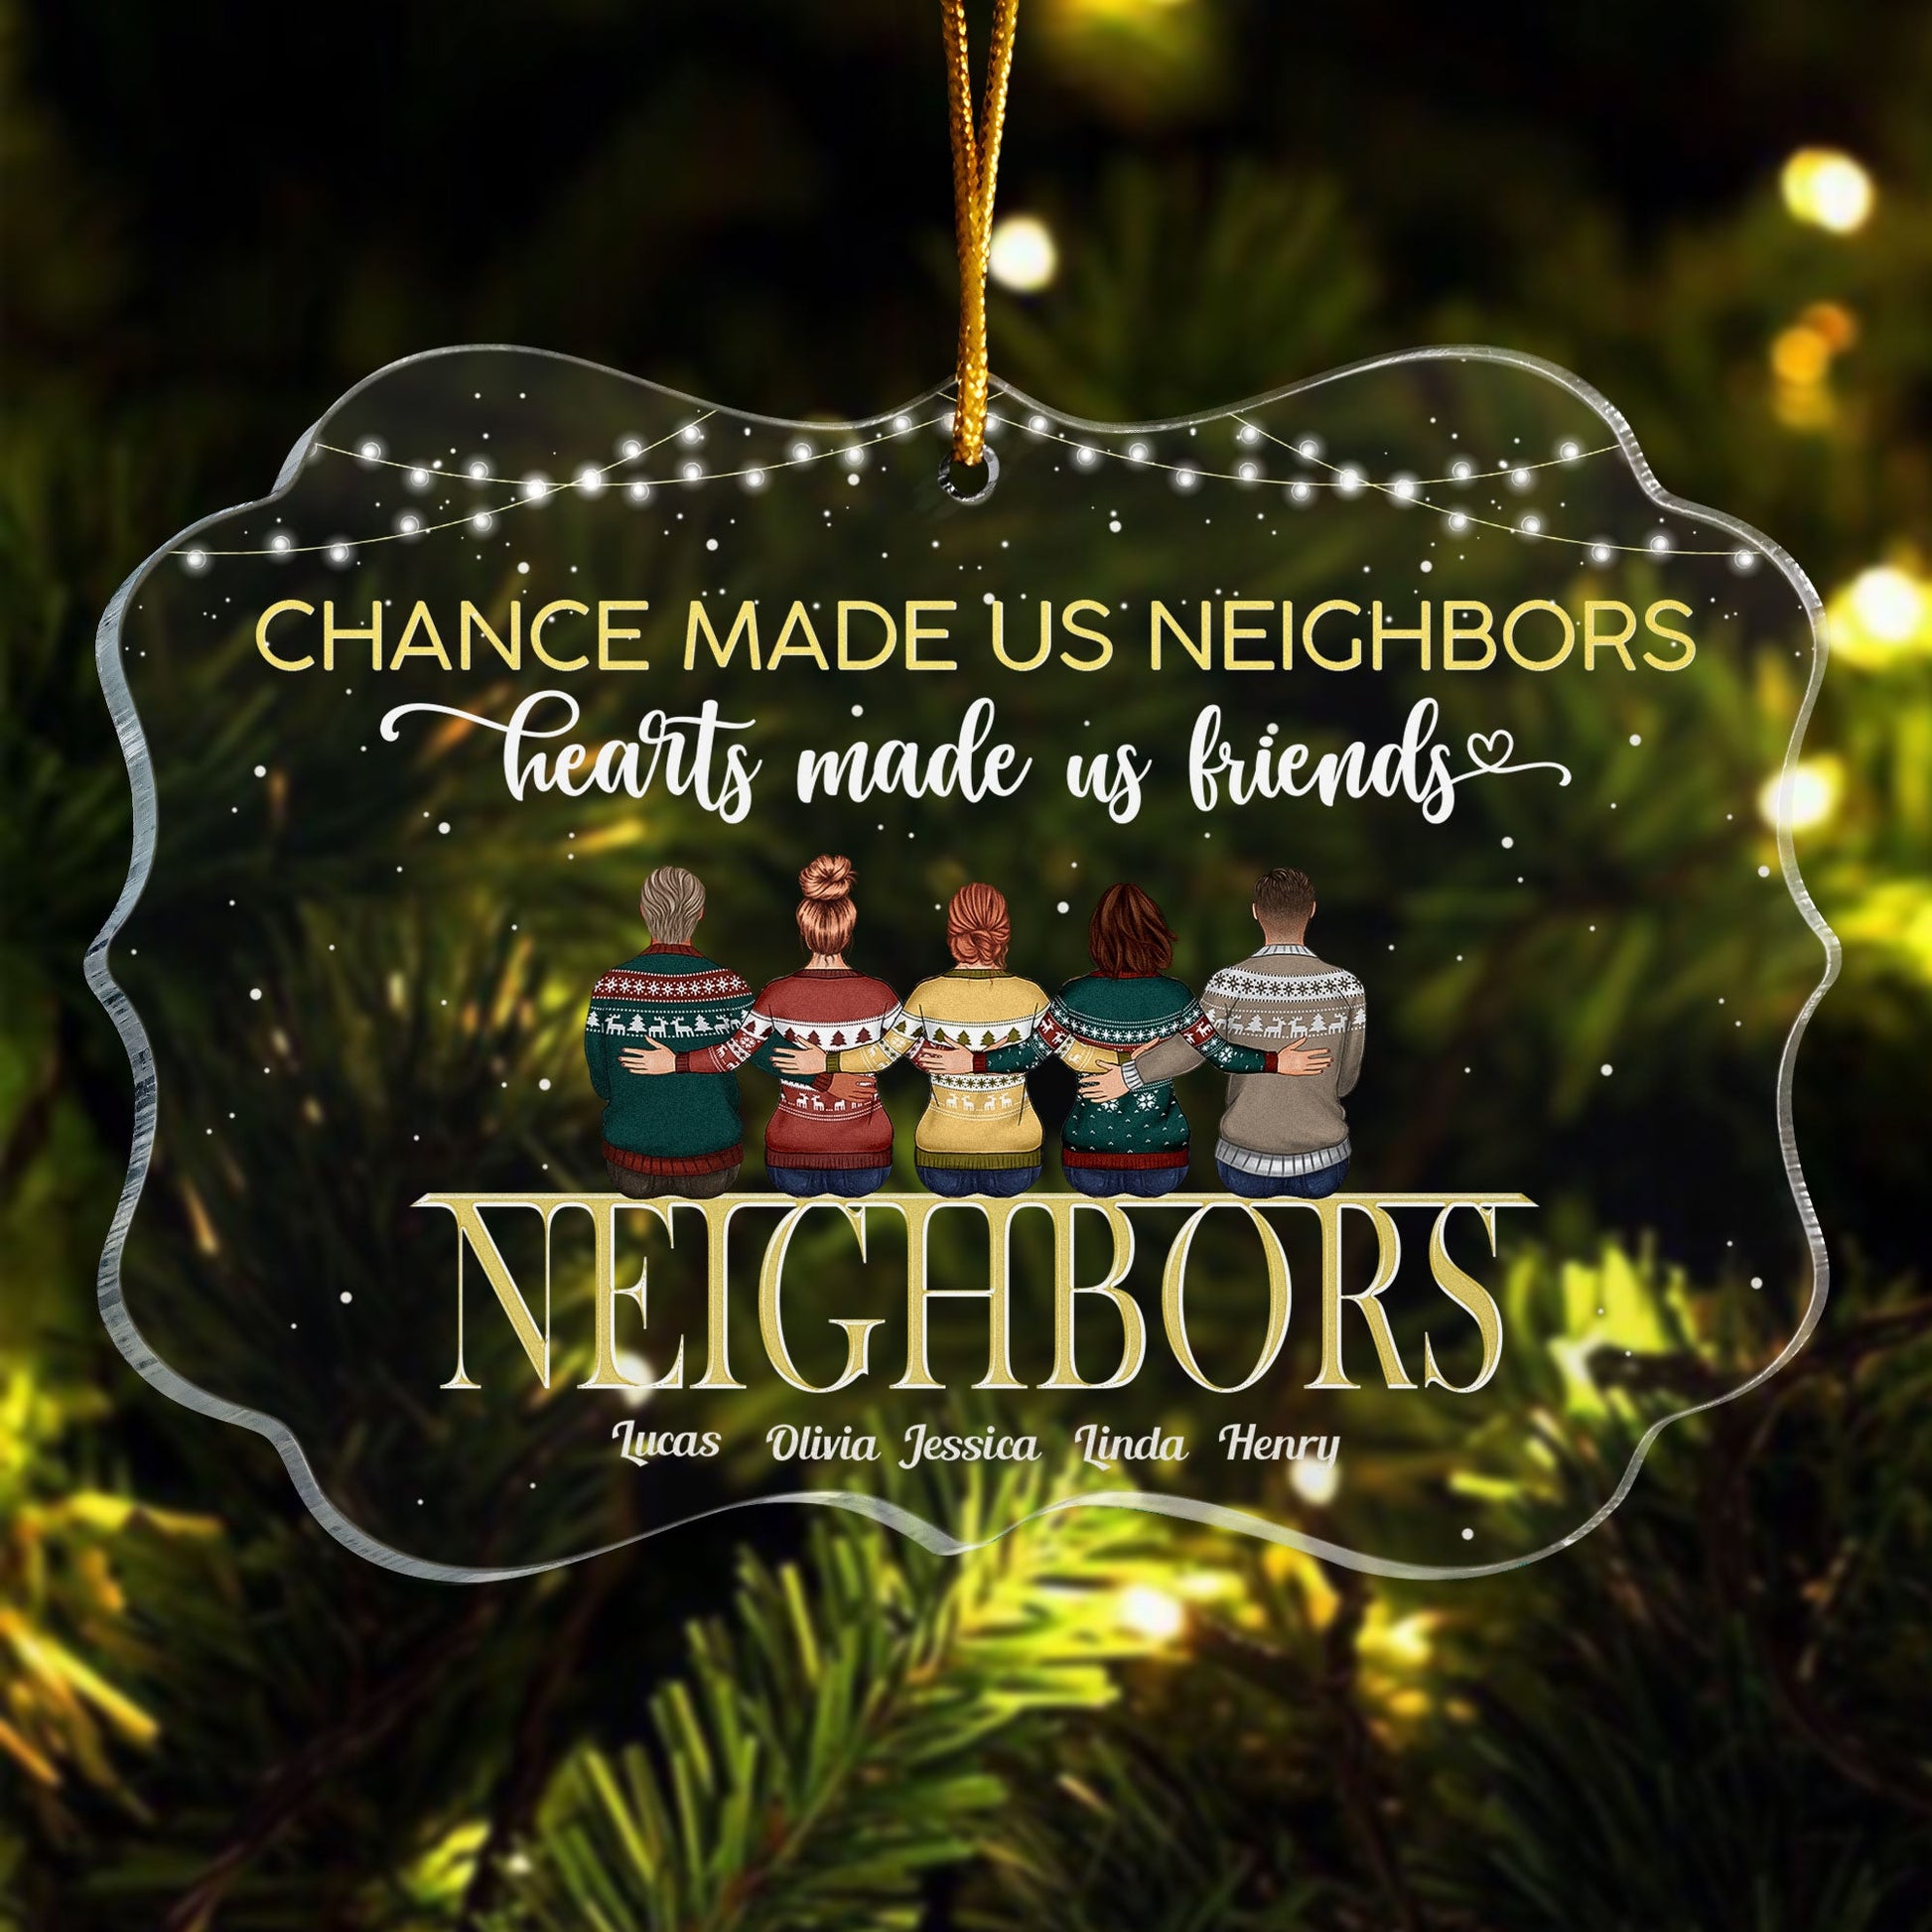 Chance Made Us Neighbor Hearts Made Us Friends Ornament, Personalized